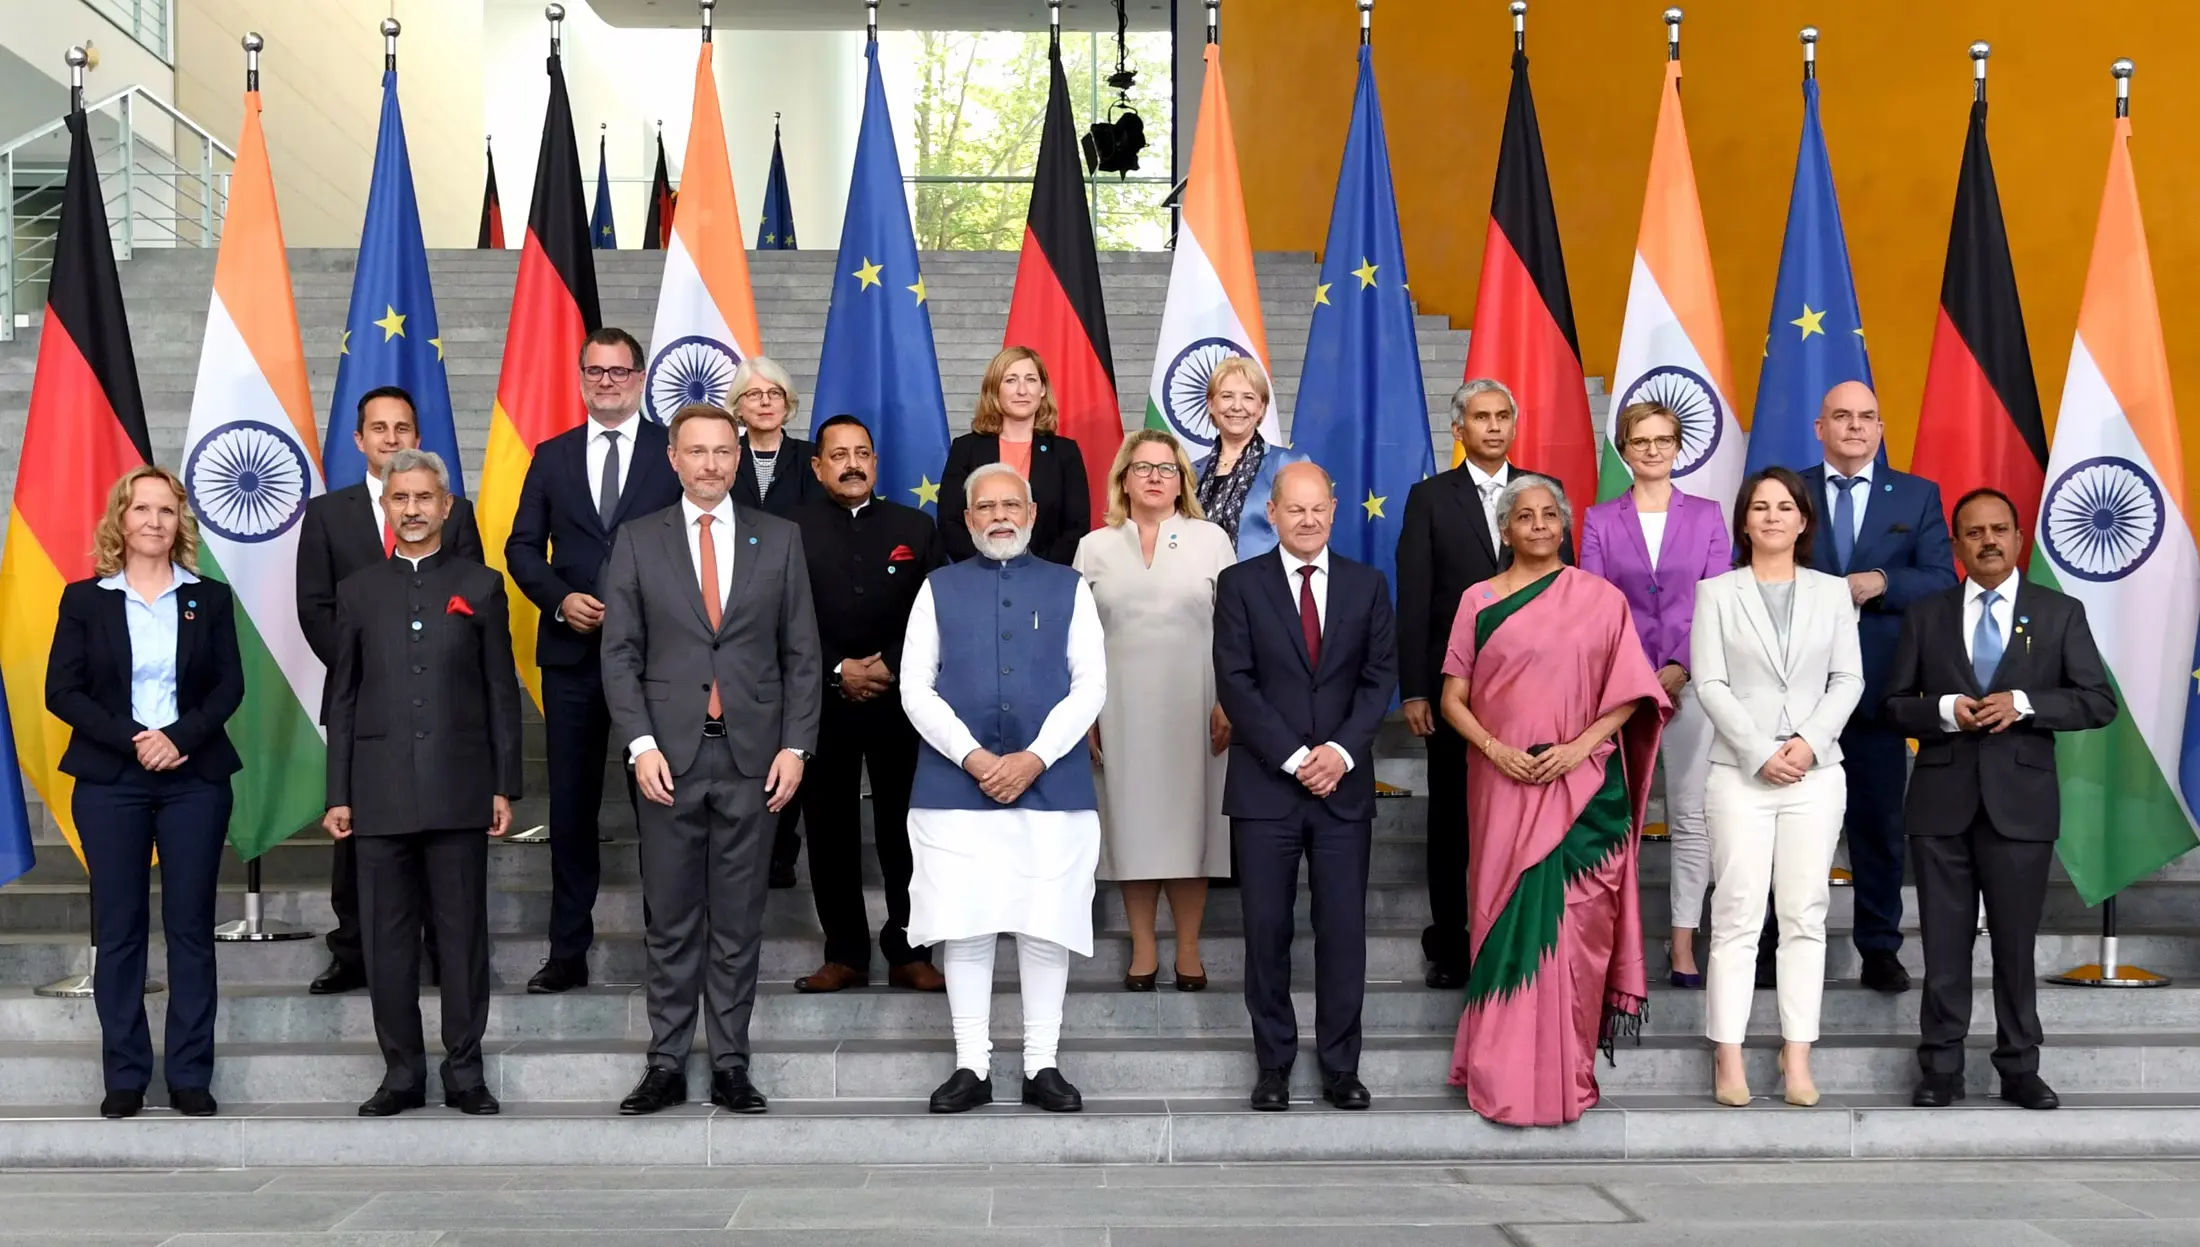 A diplomatic gesture: Italian Prime Minister Giorgia Meloni emphasizes the importance of India's presence at the G7 Summit, signaling opportunities for cooperation and mutual benefit.